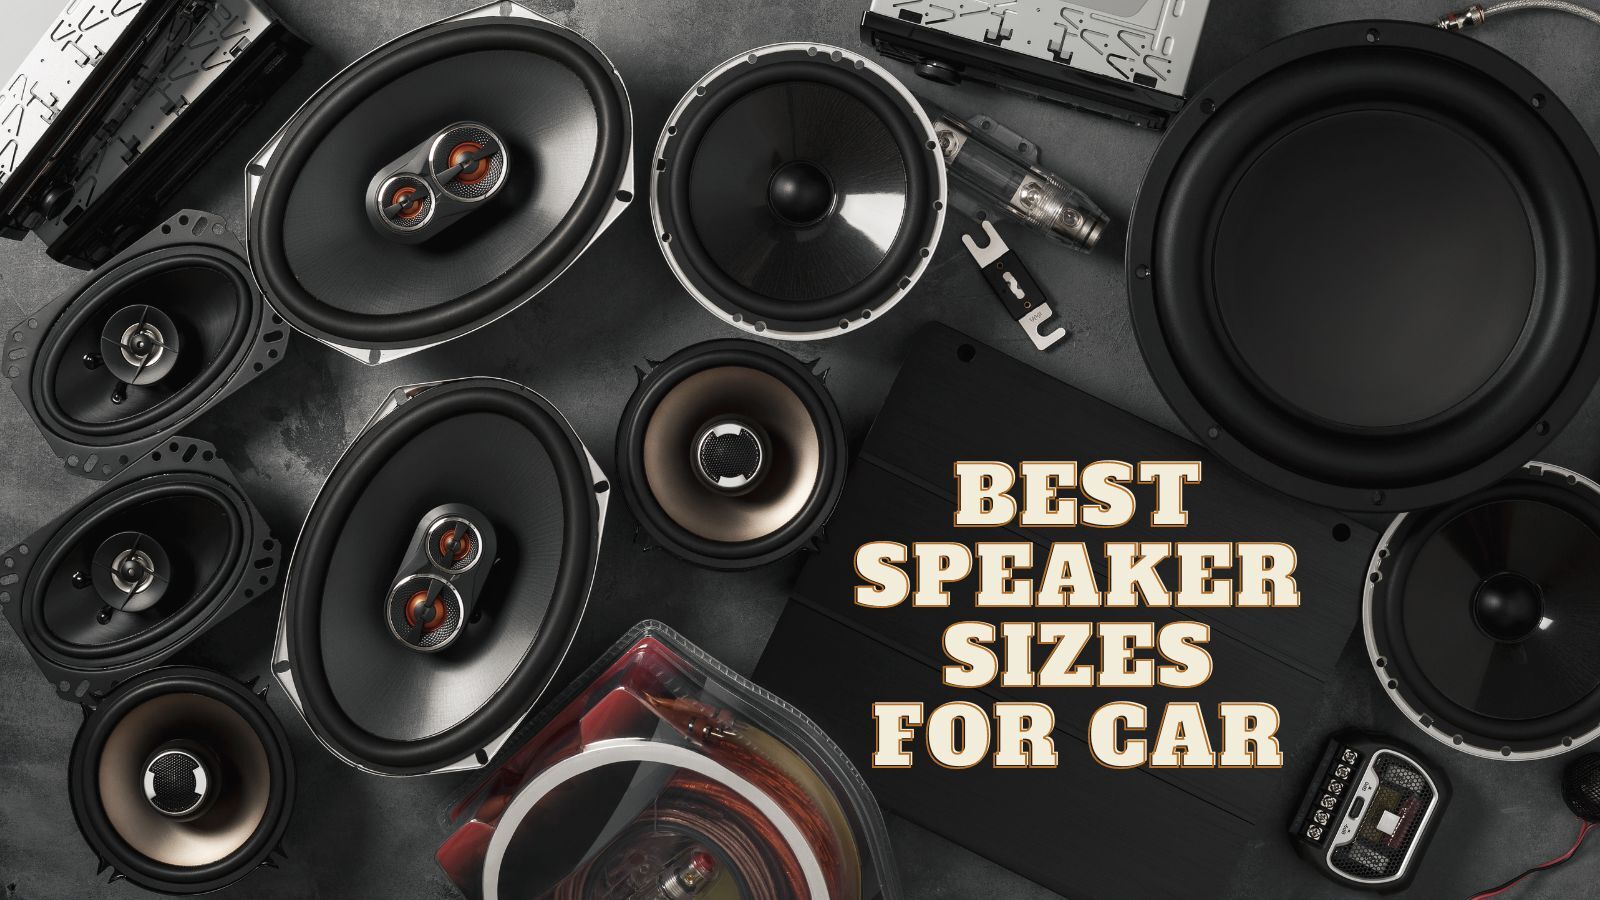 What Are the Best Speaker Sizes for Your Car?